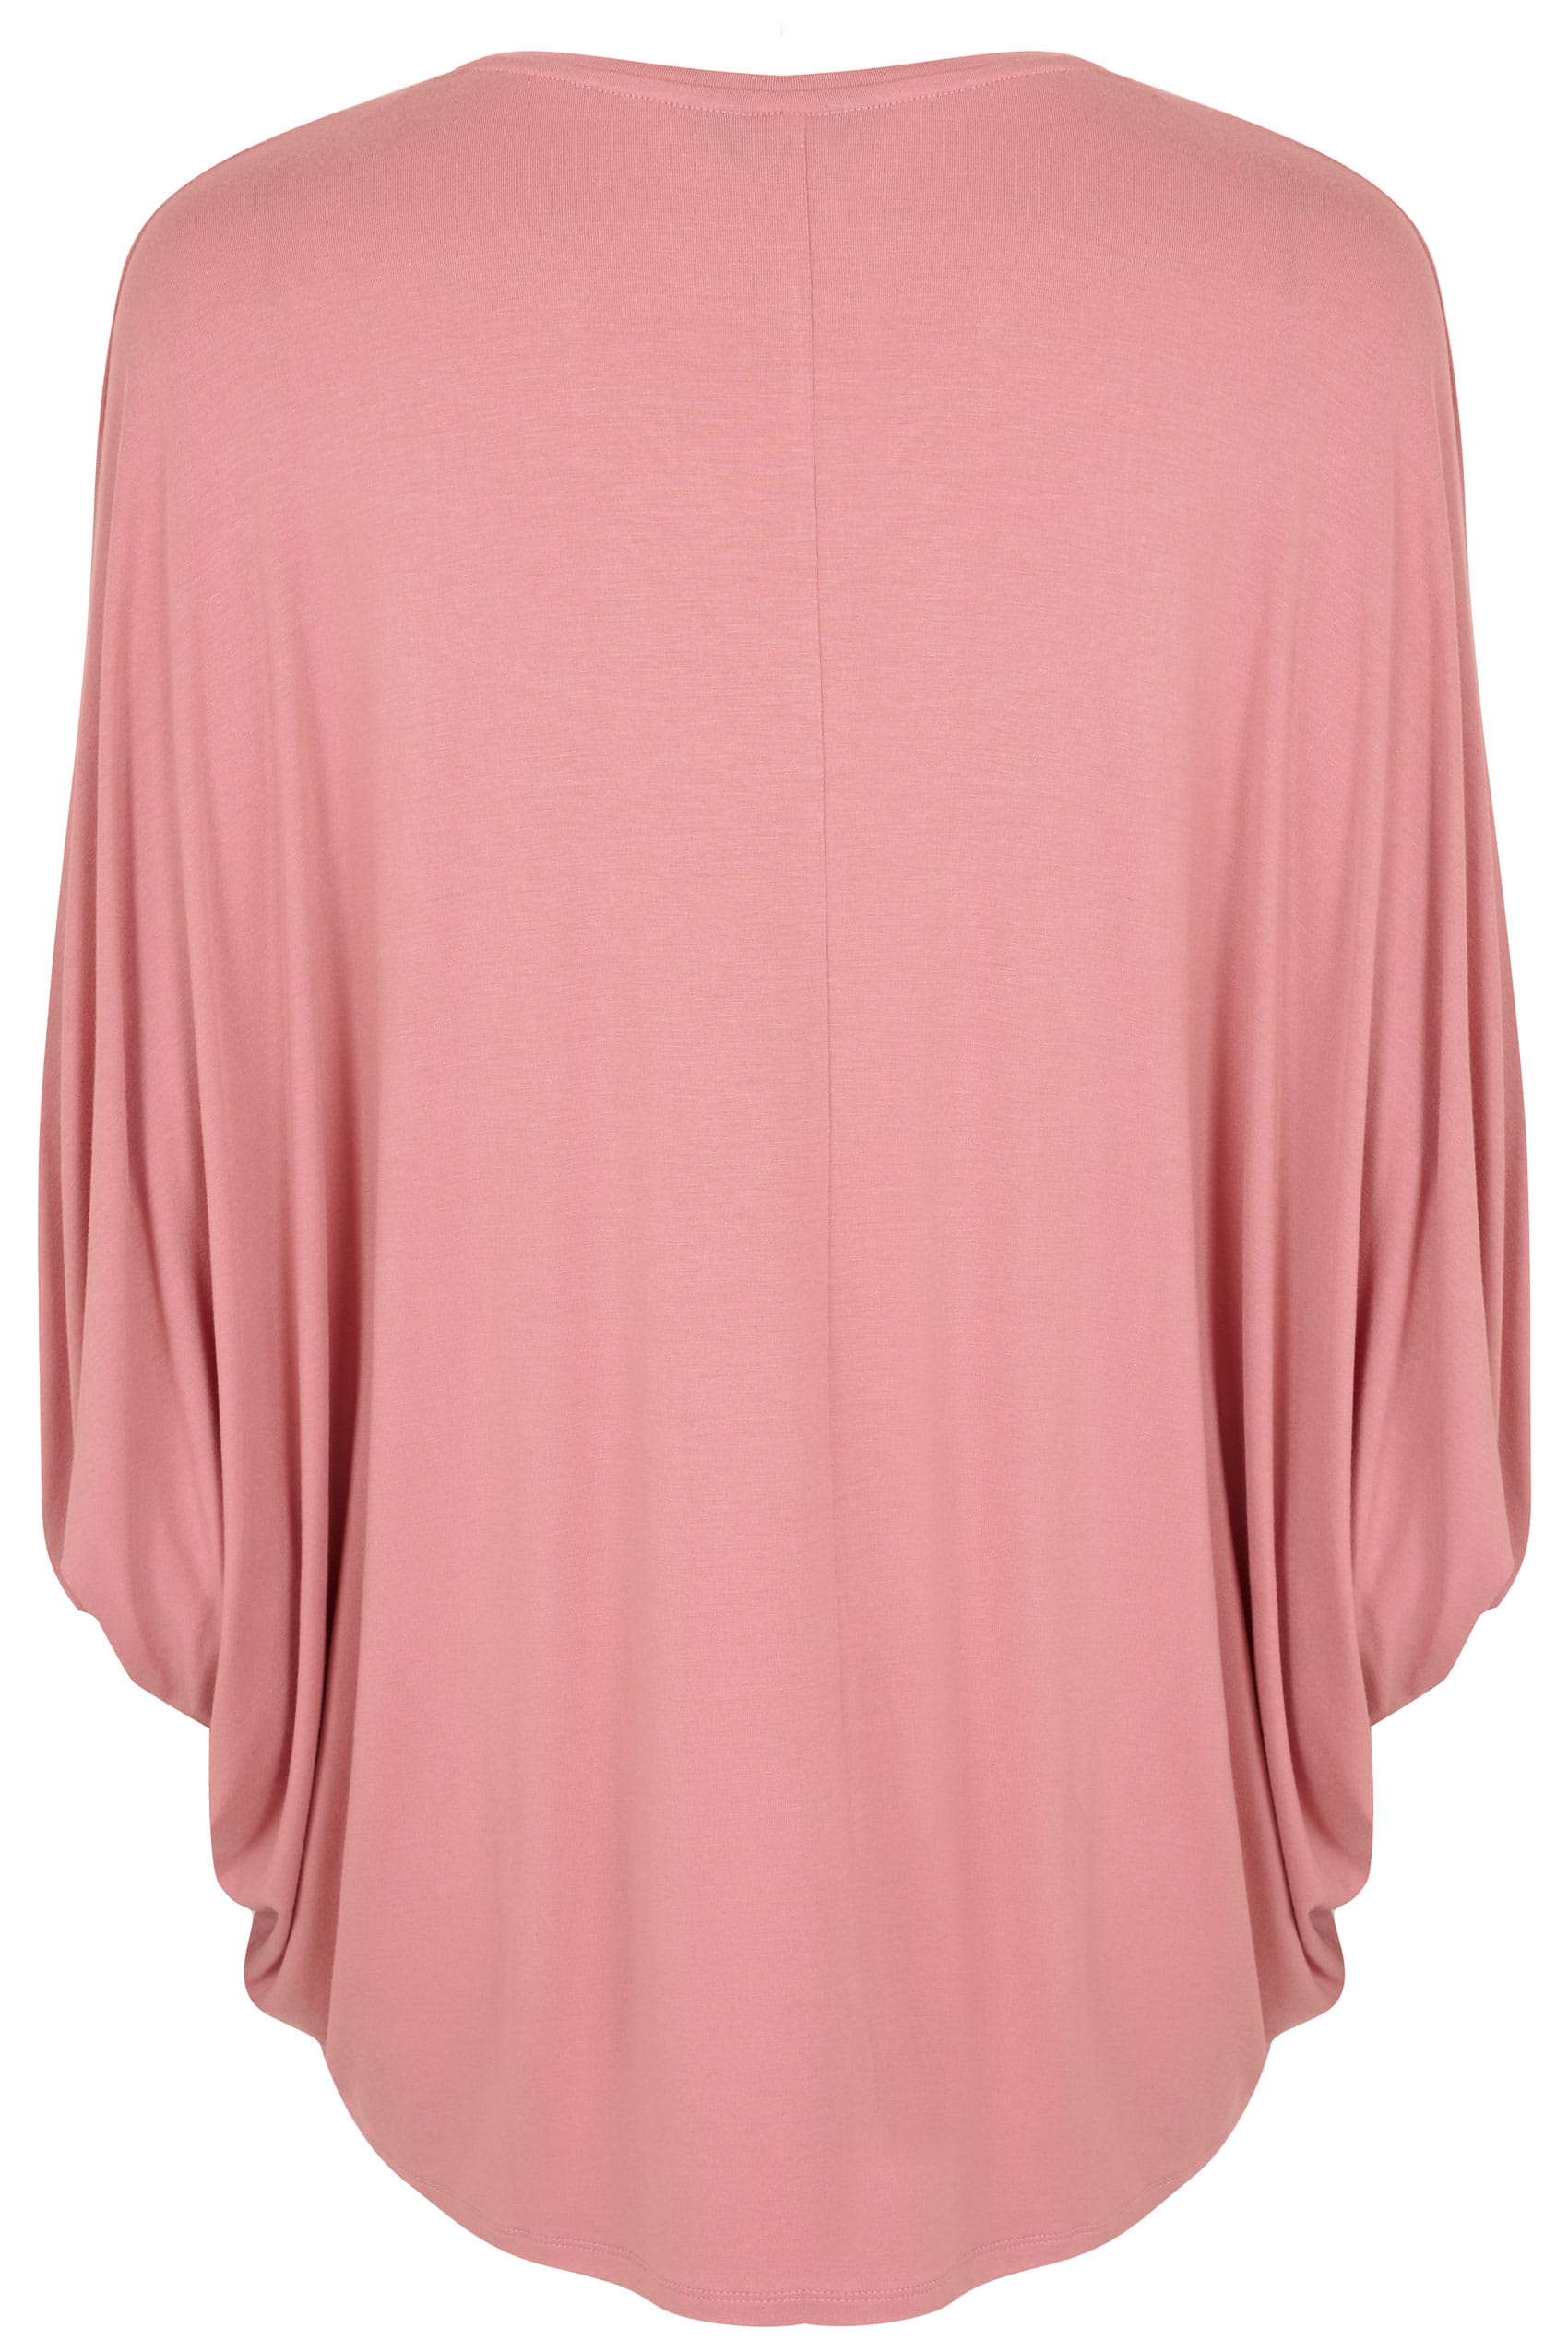 Pink Oversized Top With Faux Pearl Studs , plus size 16 to 36